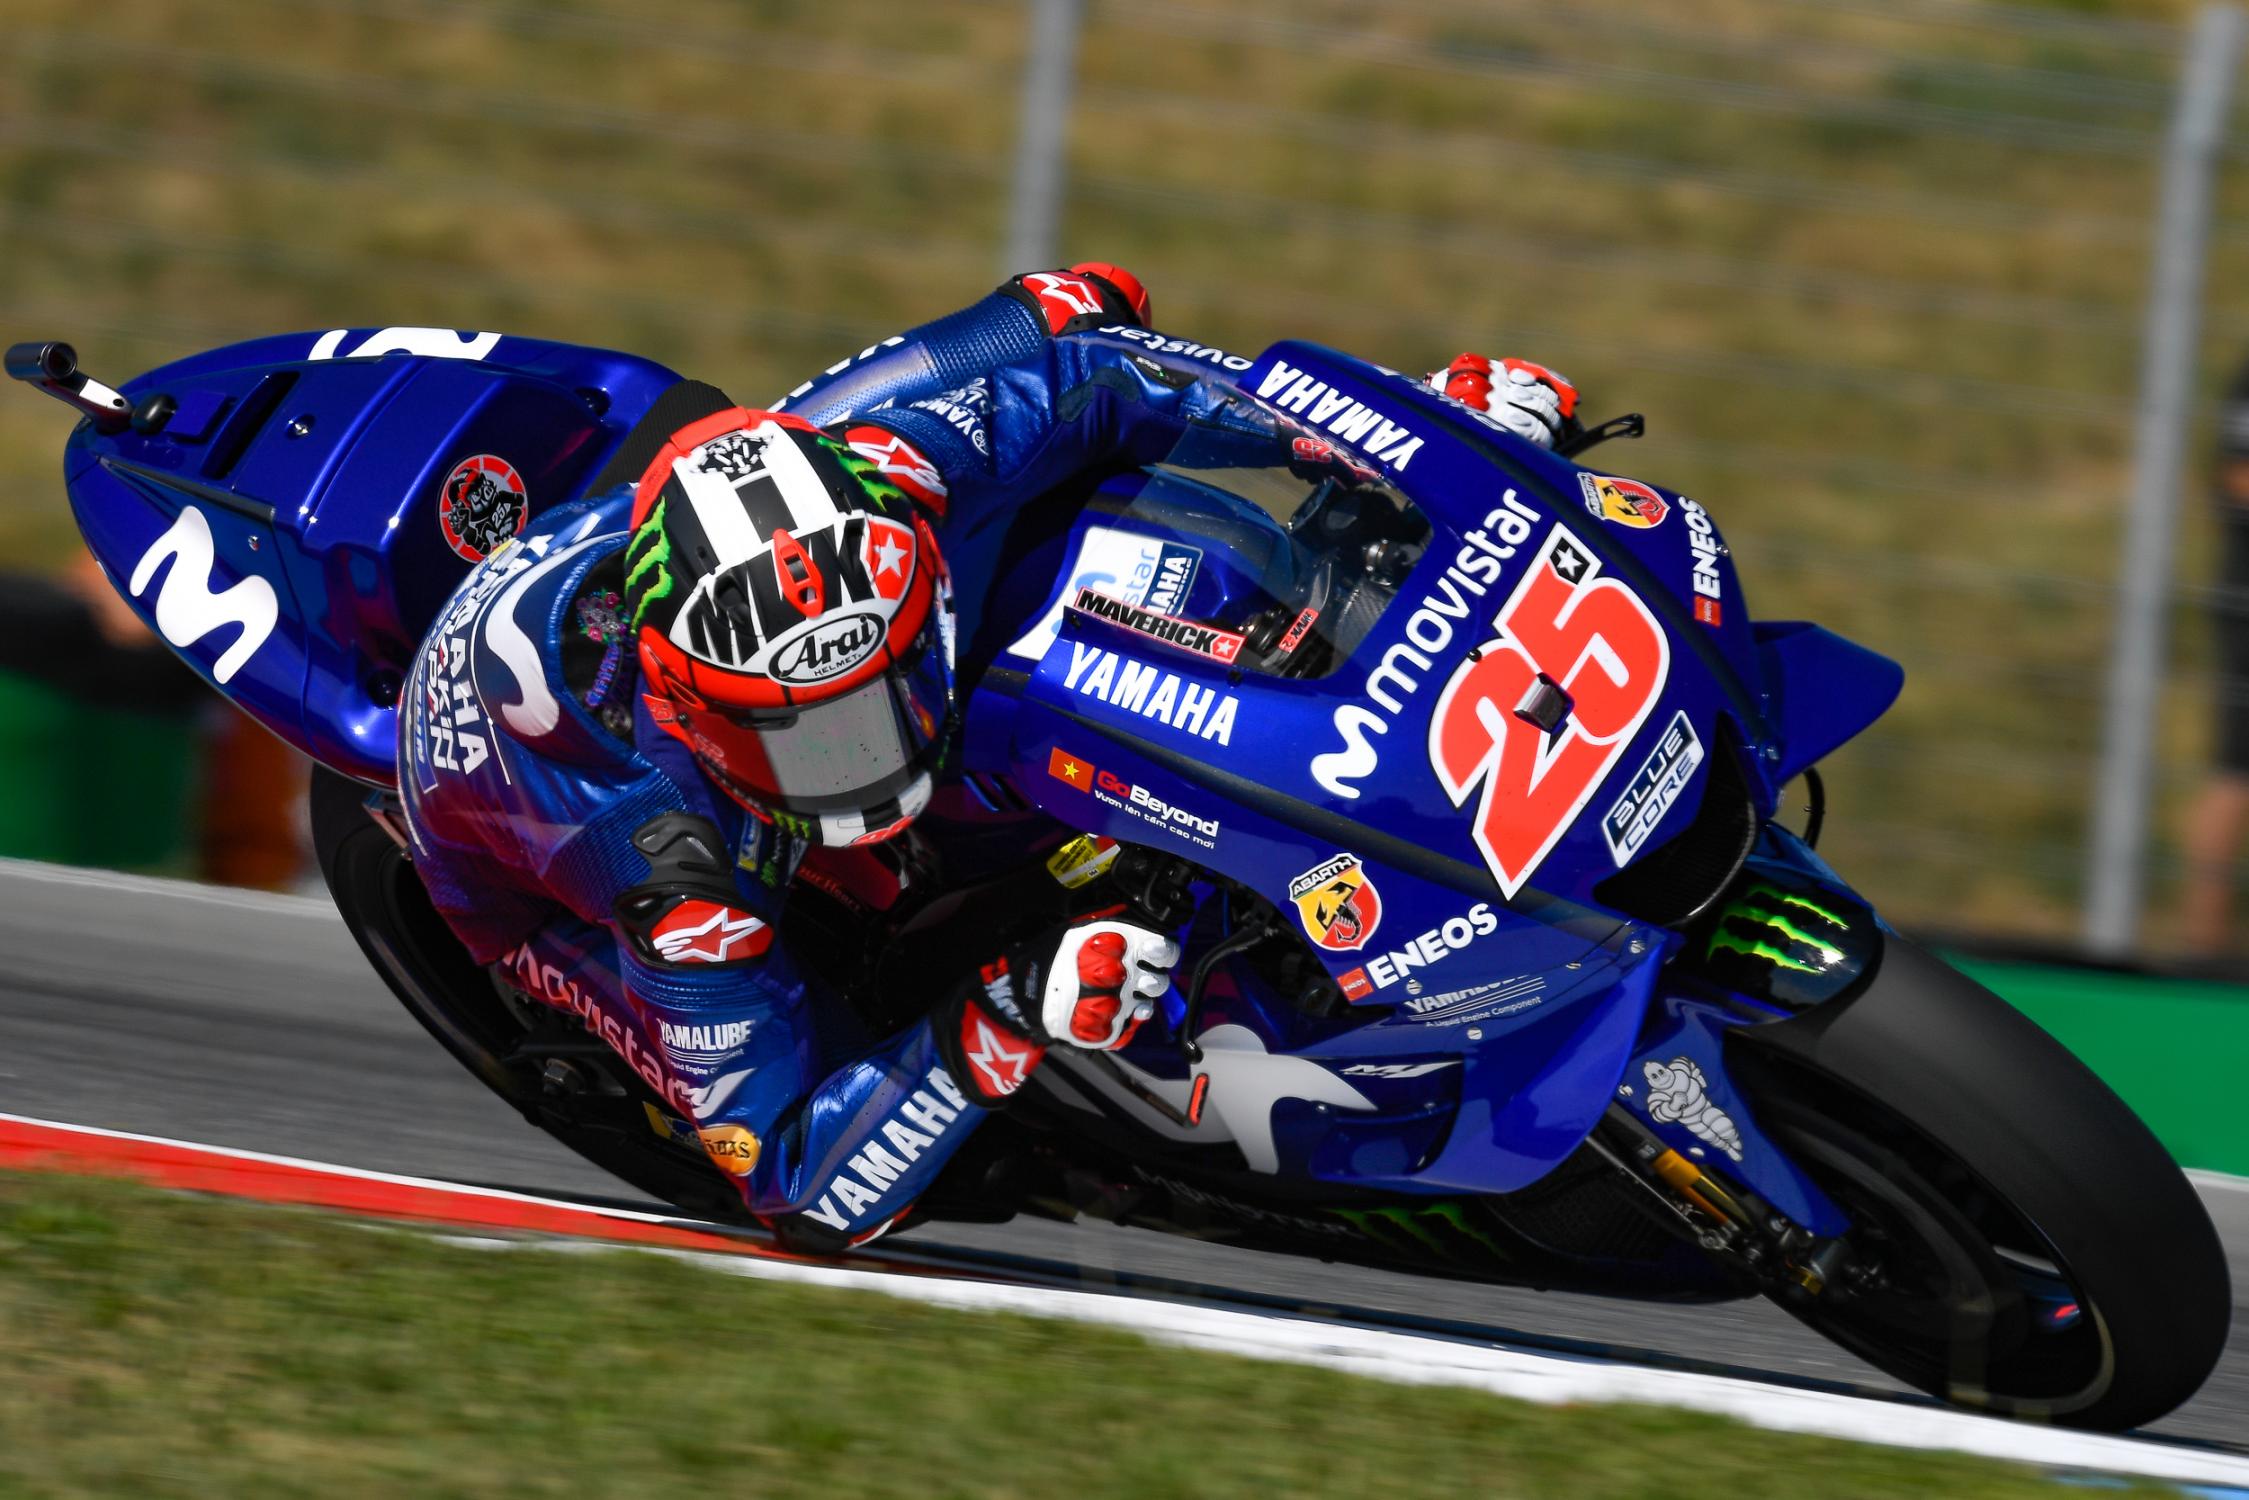 MotoGP Viales Use Rossis Settings We Have Different Riding